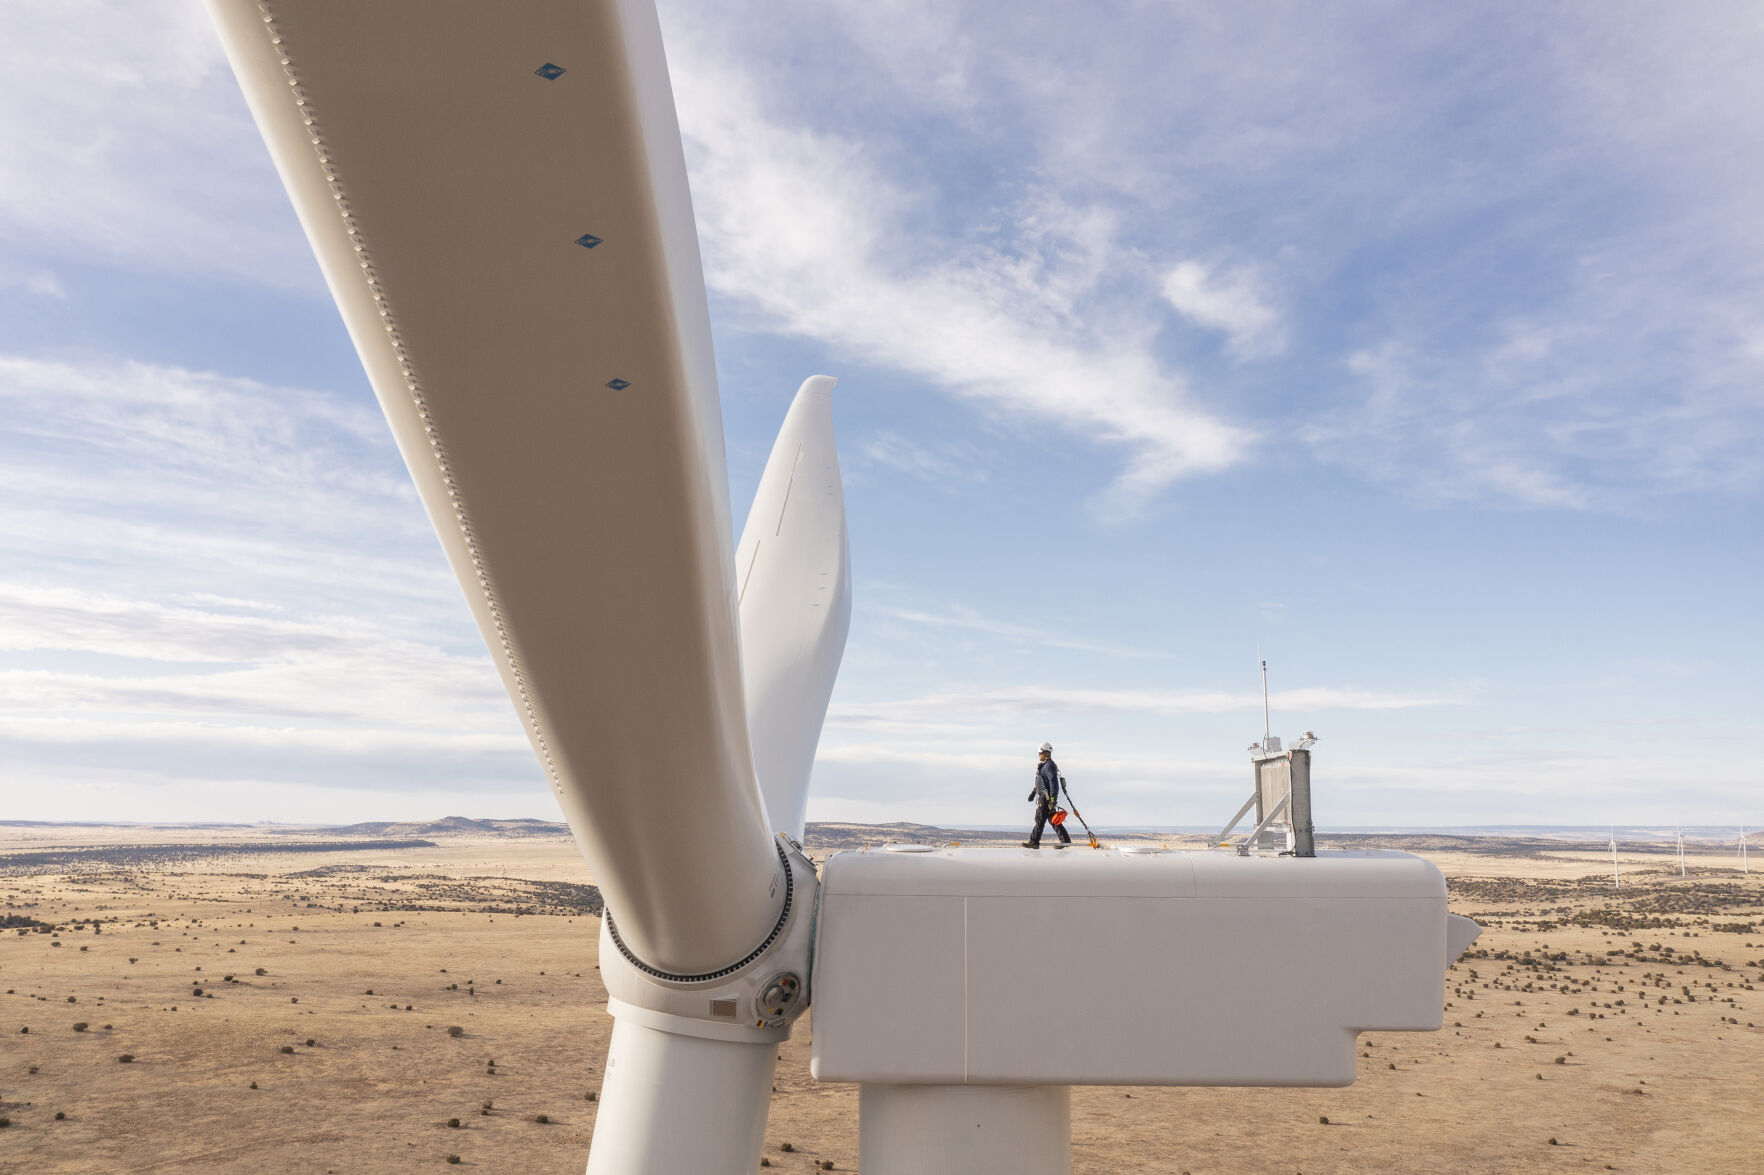 <p>This undated image provided by GE Vernova shows a worker atop a wind turbine at the Borderland Wind Project in western New Mexico near the Arizona state line. GE Vernova has received a record order for 674 turbines that will be used for the SunZia Wind Project in central New Mexico, which is expected to be the largest wind farm in the Western Hemisphere when it comes online in 2026. (Rich Crowder/GE Vernova via AP)</p>   PHOTO CREDIT: Rich Crowder -